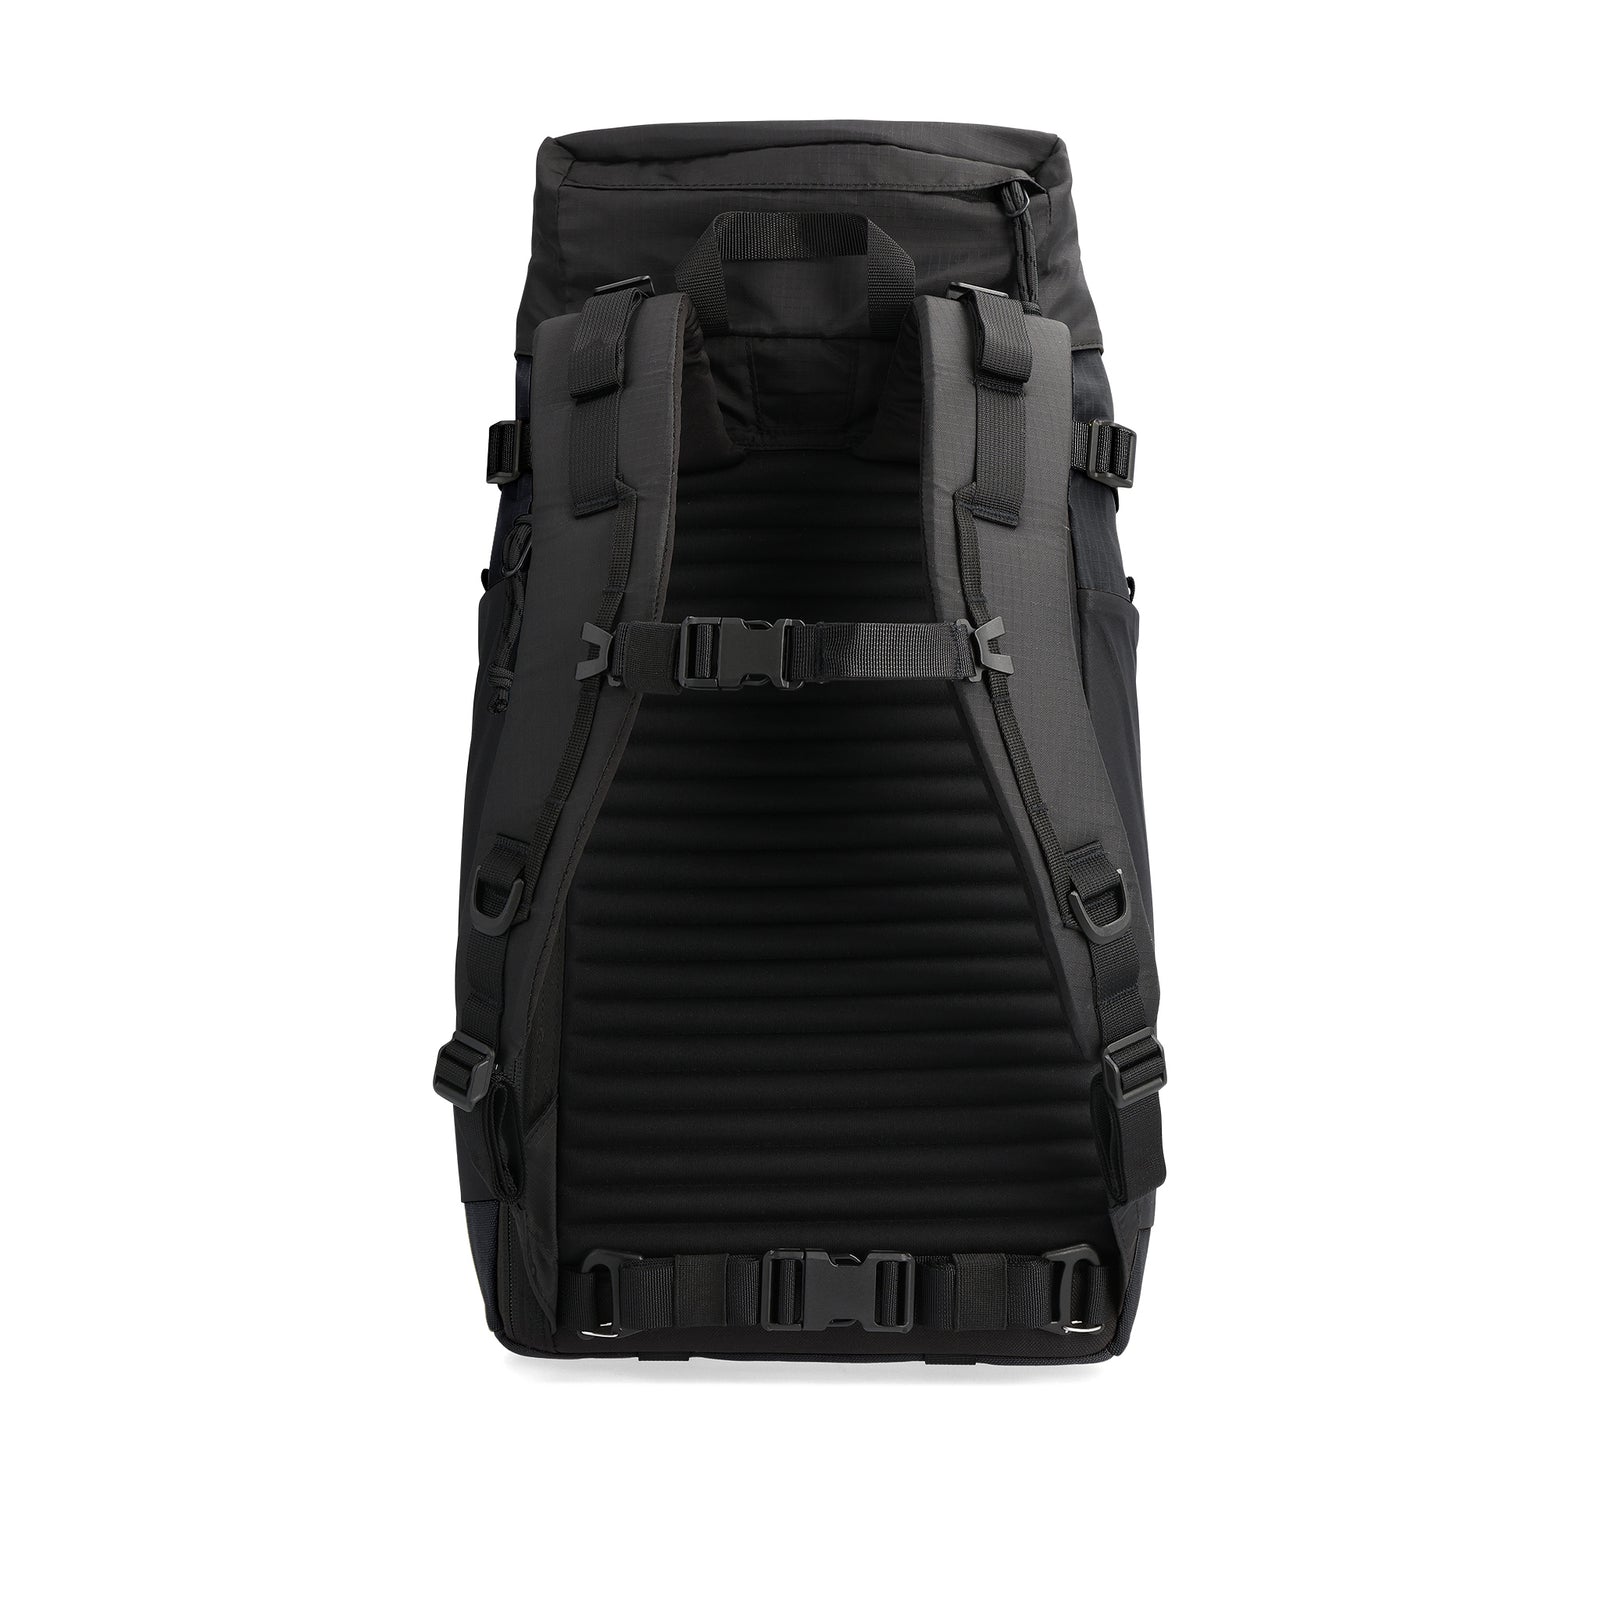 Back View of Topo Designs Mountain Pack 16L 2.0 in "Black / Black"